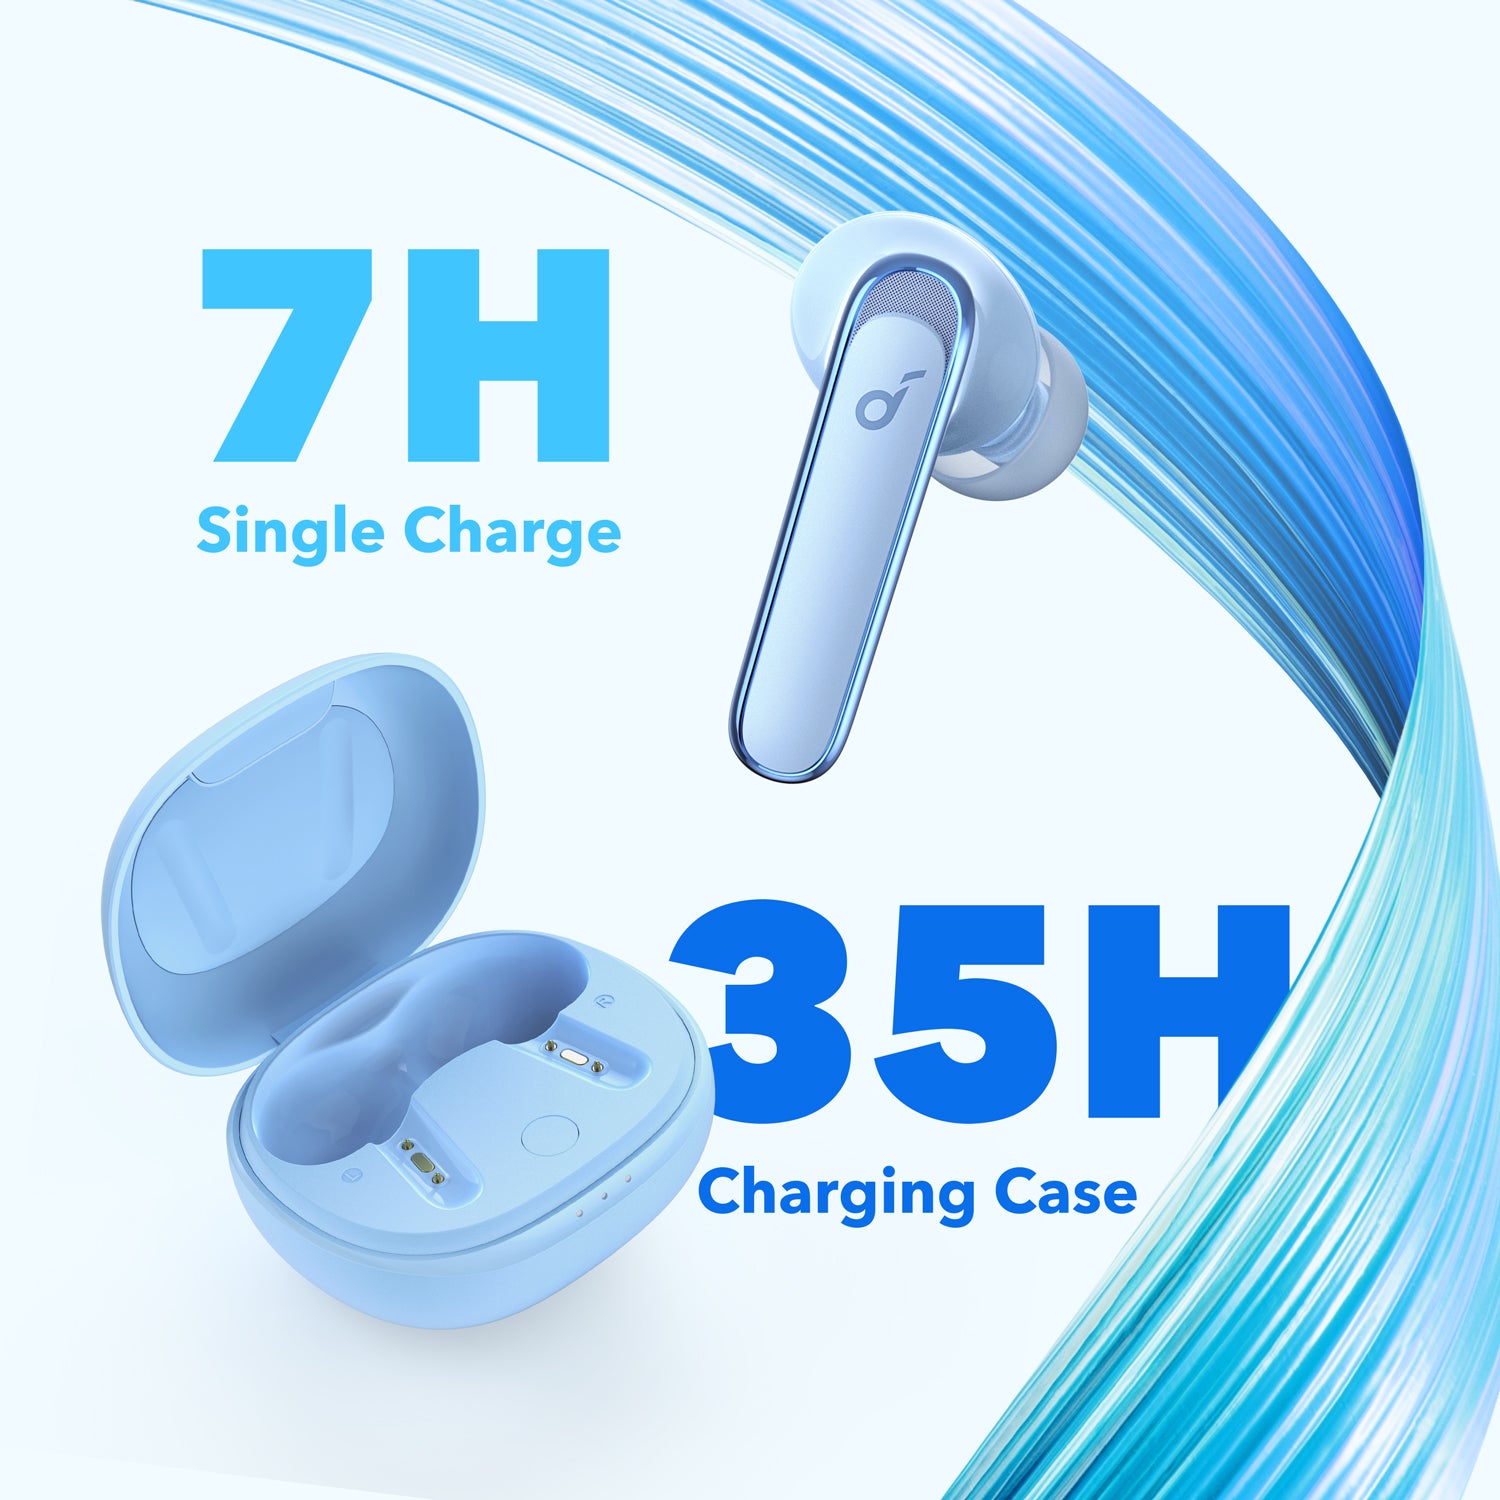 Anker Soundcore Life P3 Noise Cancelling Earbuds